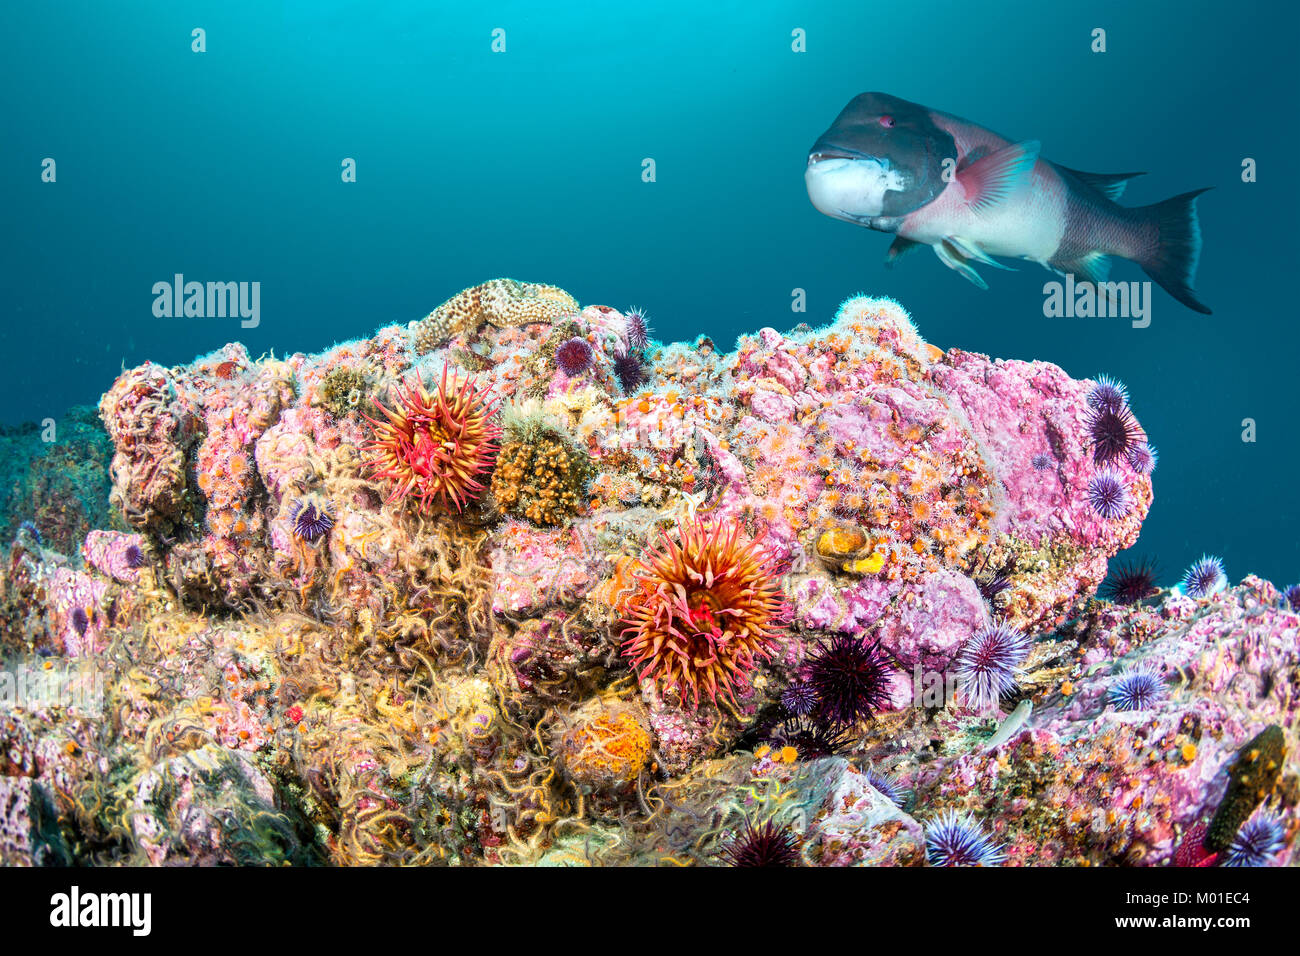 A red rose anemone perched atop a reef in Southern California's Channel Islands attracts a large sheephead gamefish Stock Photo